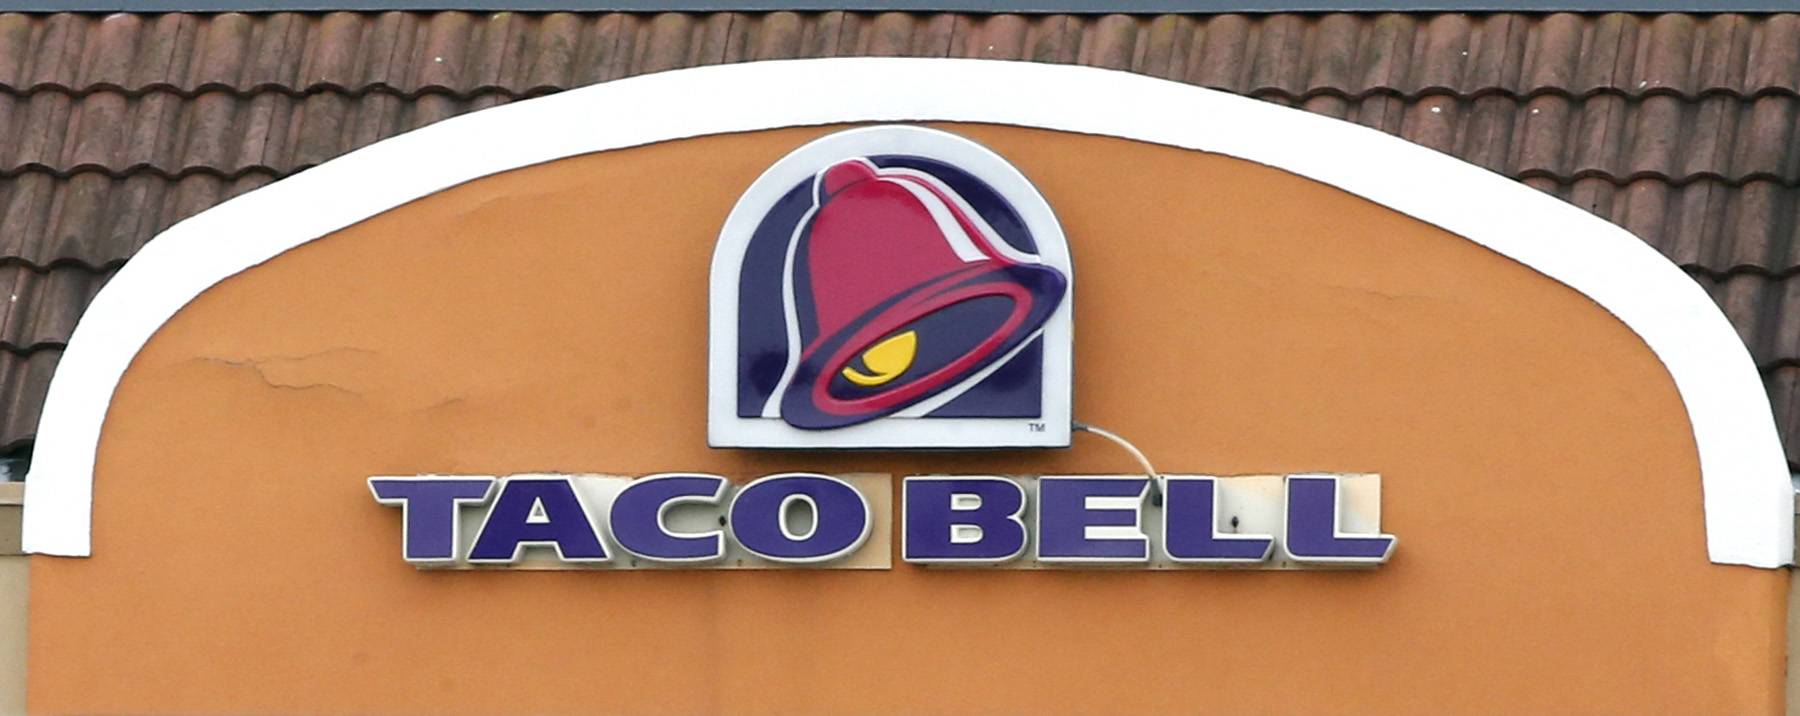 Taco Bell Reveals What’s in Their Meat